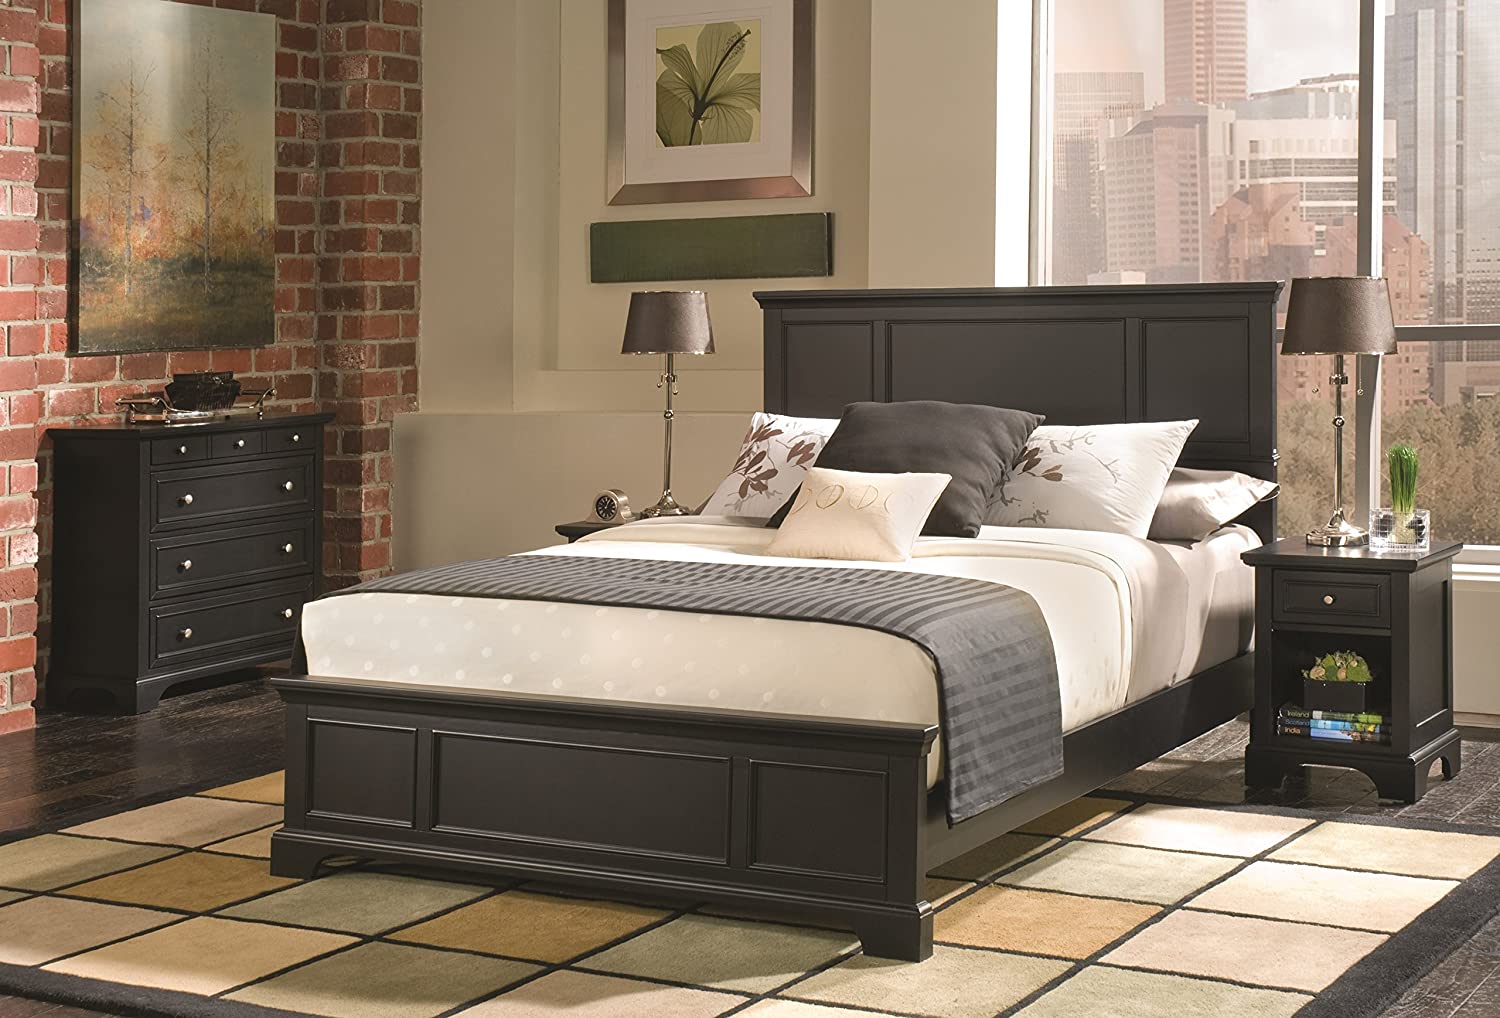 Best Cheap Bedroom Furniture Sets Under $500: Full Review